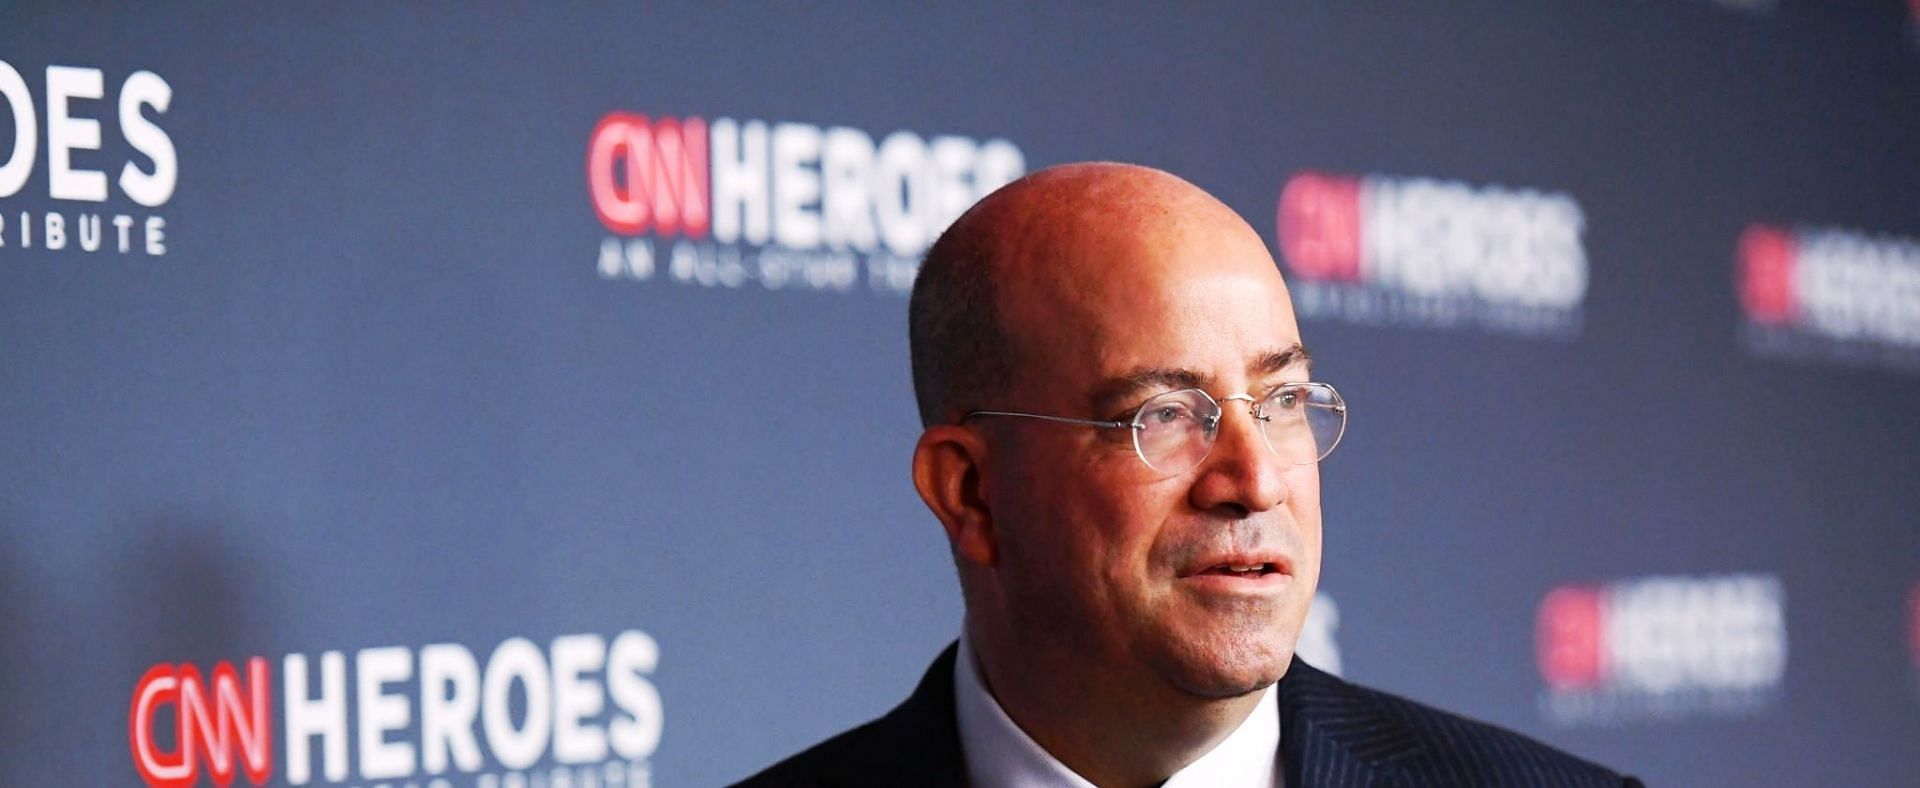 CNN President Jeff Zucker has resigned from his position after his undisclosed relationship with a colleague came to light (Image via Mike Coppola/Getty Images)